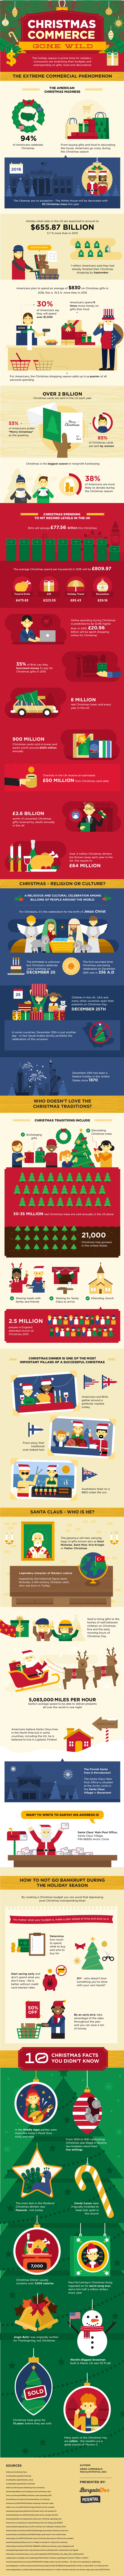 Christmas Commerce Gone Wild Infographic